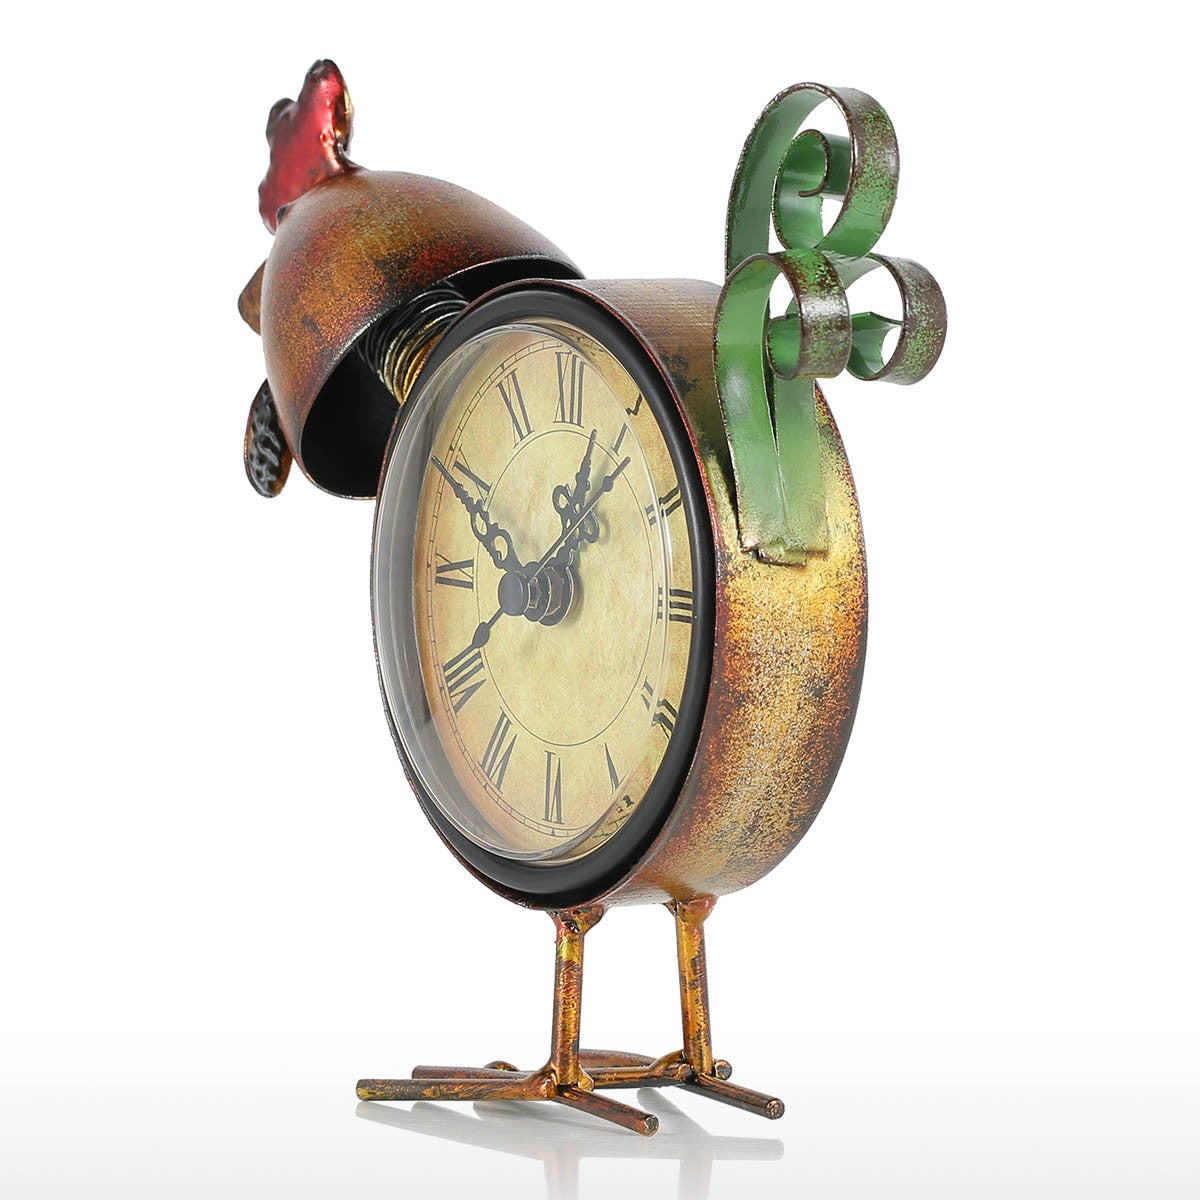 Chicken Decor and Metal Chicken Decor with Diy Room Decor and Analog Clock for Christmas Decorations